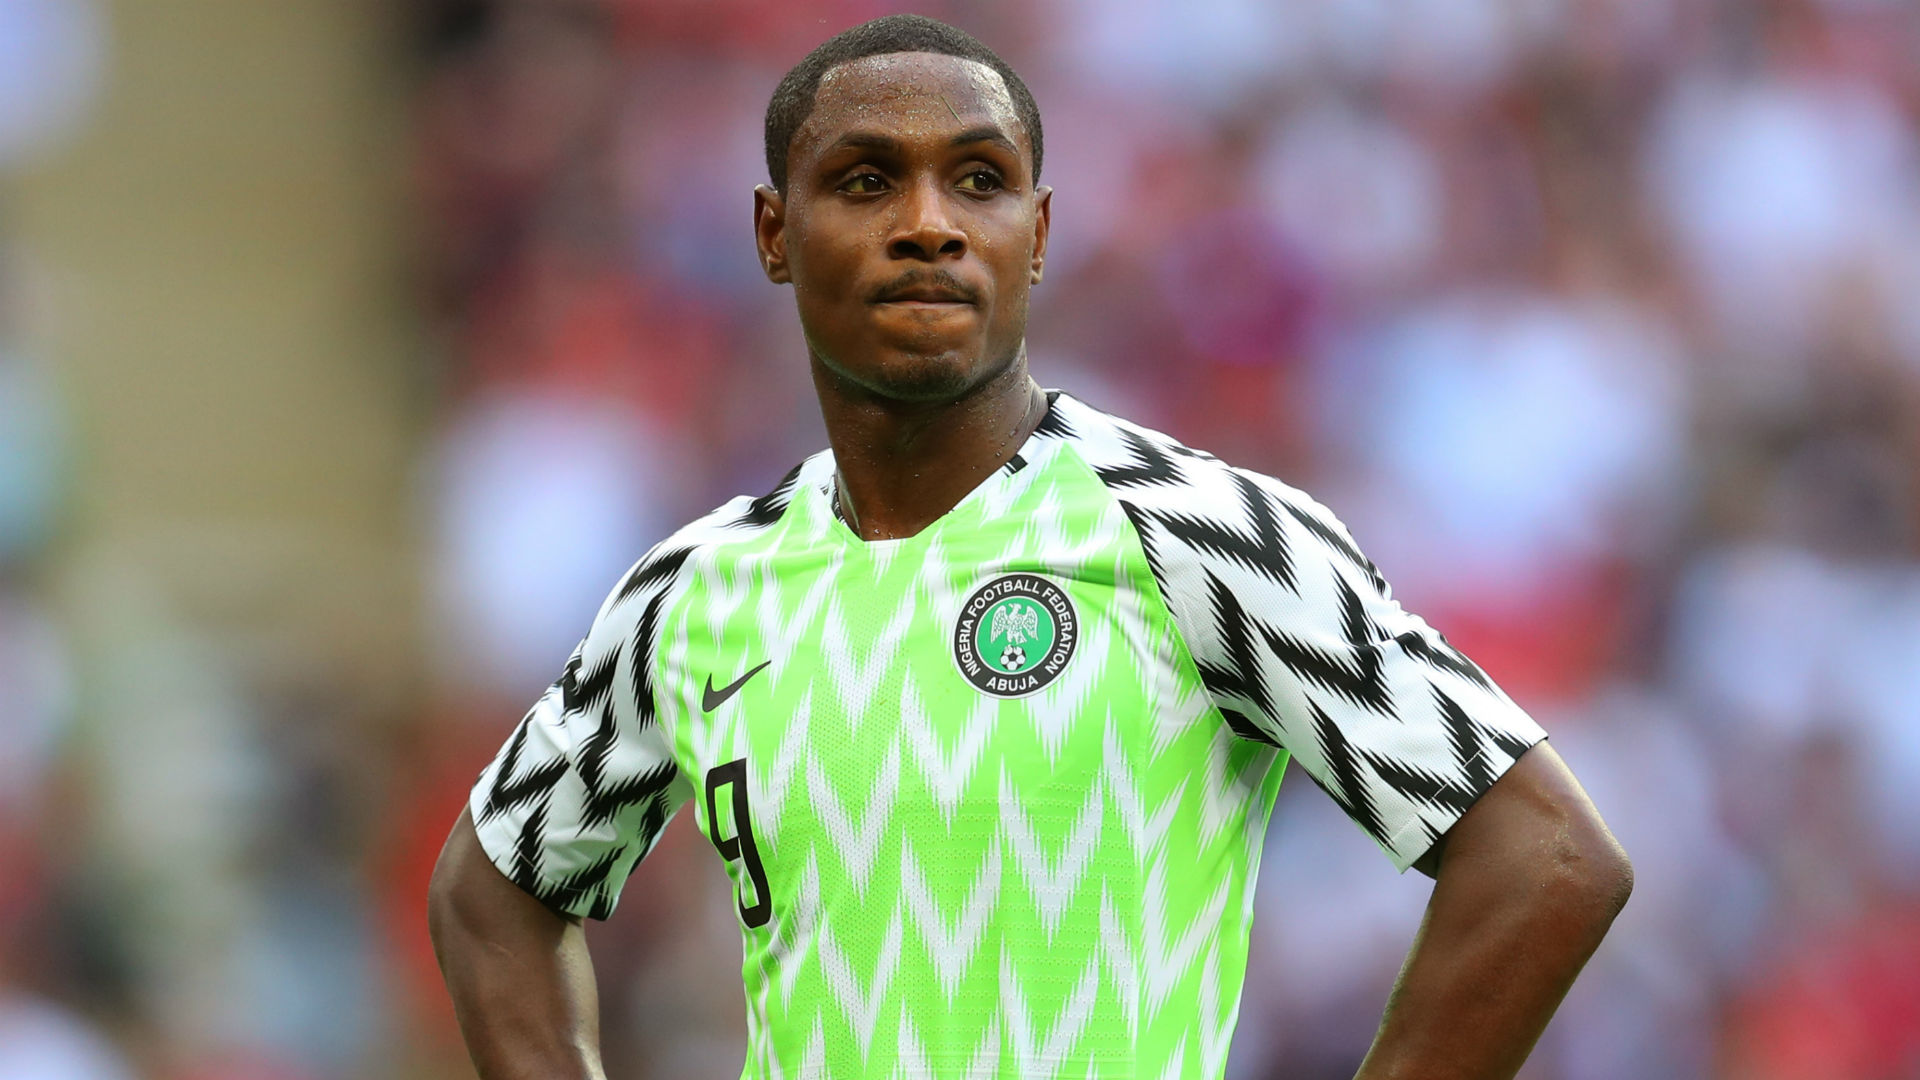 Odion Ighalo joining Manchester United caught many by surprise, but now Ole Gunnar Solskjaer is urging him to earn a permanent contract.